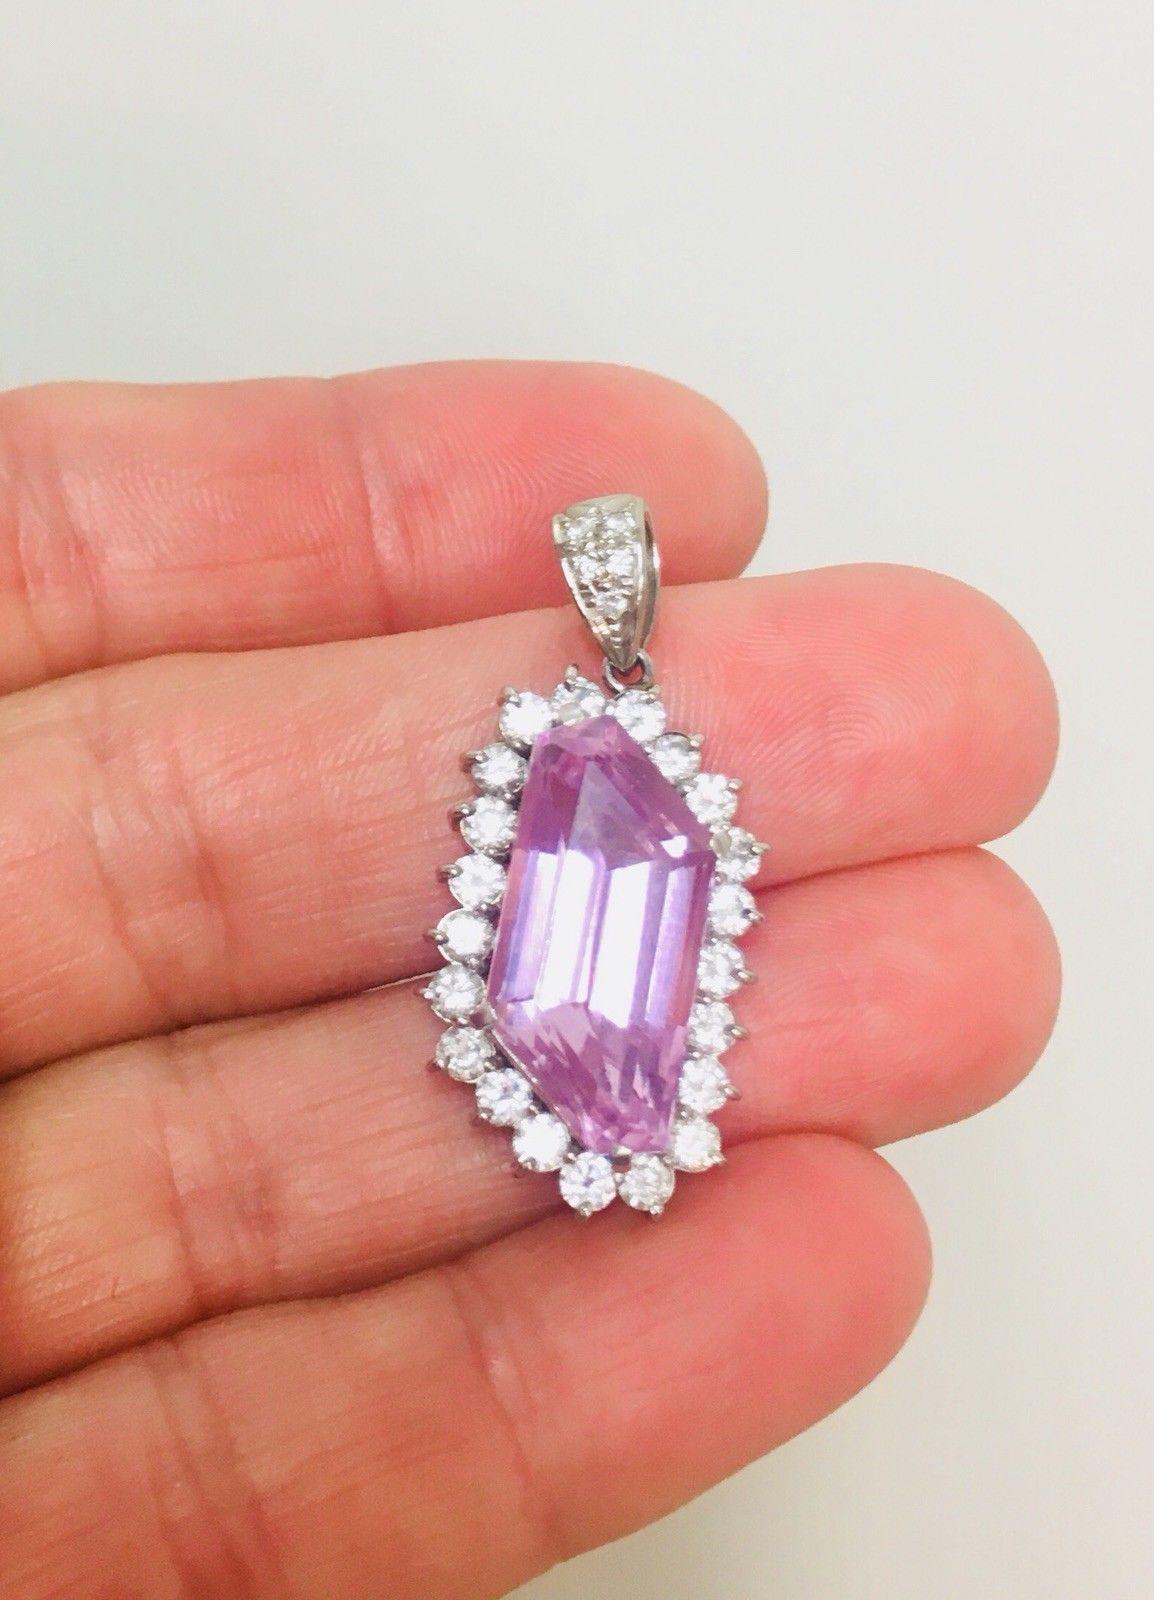 Estate Platinum 14 Carat VS Diamond Kunzite Pendant Necklace In Excellent Condition For Sale In Shaker Heights, OH